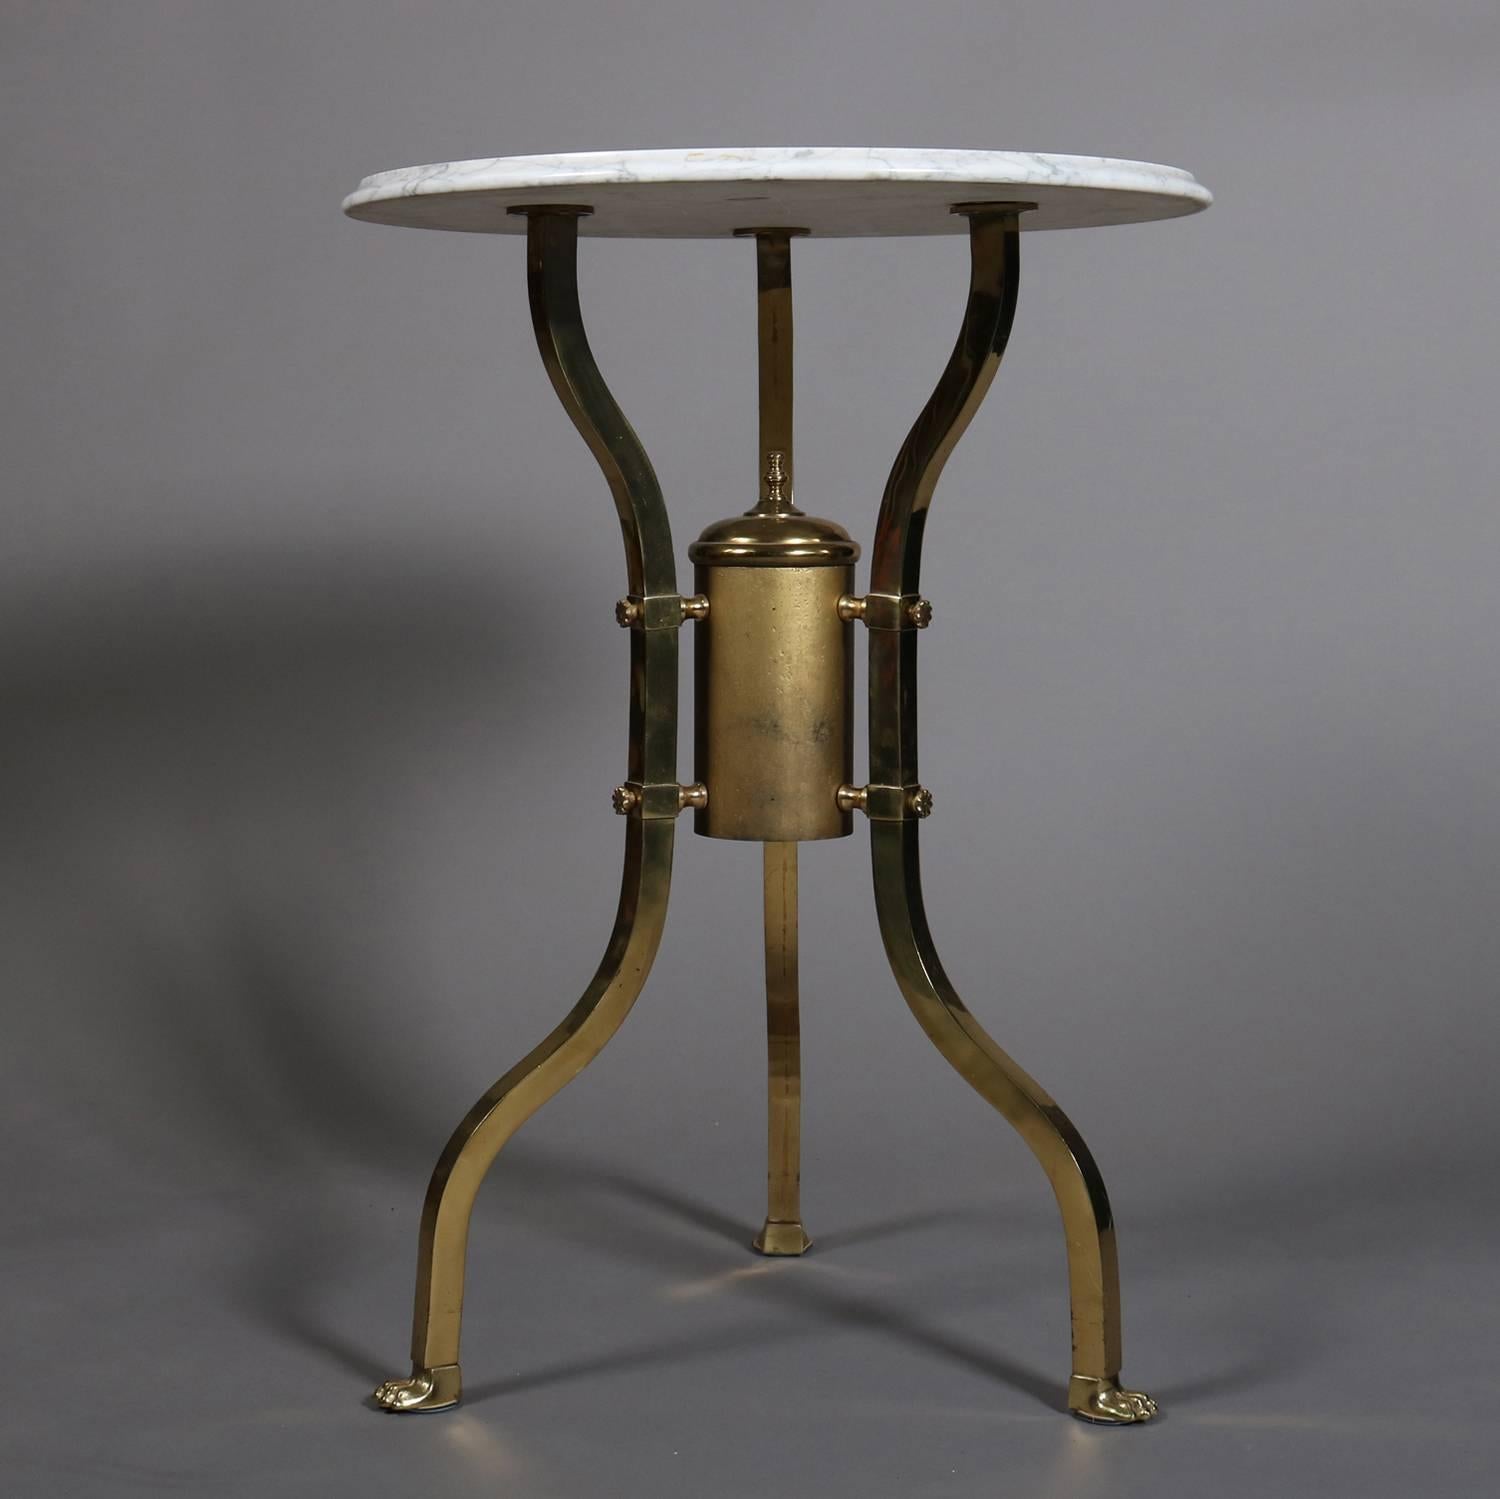 Aesthetic Movement round parlor table features brass frame, each leg seated on paw feet, Italian marble top, original 